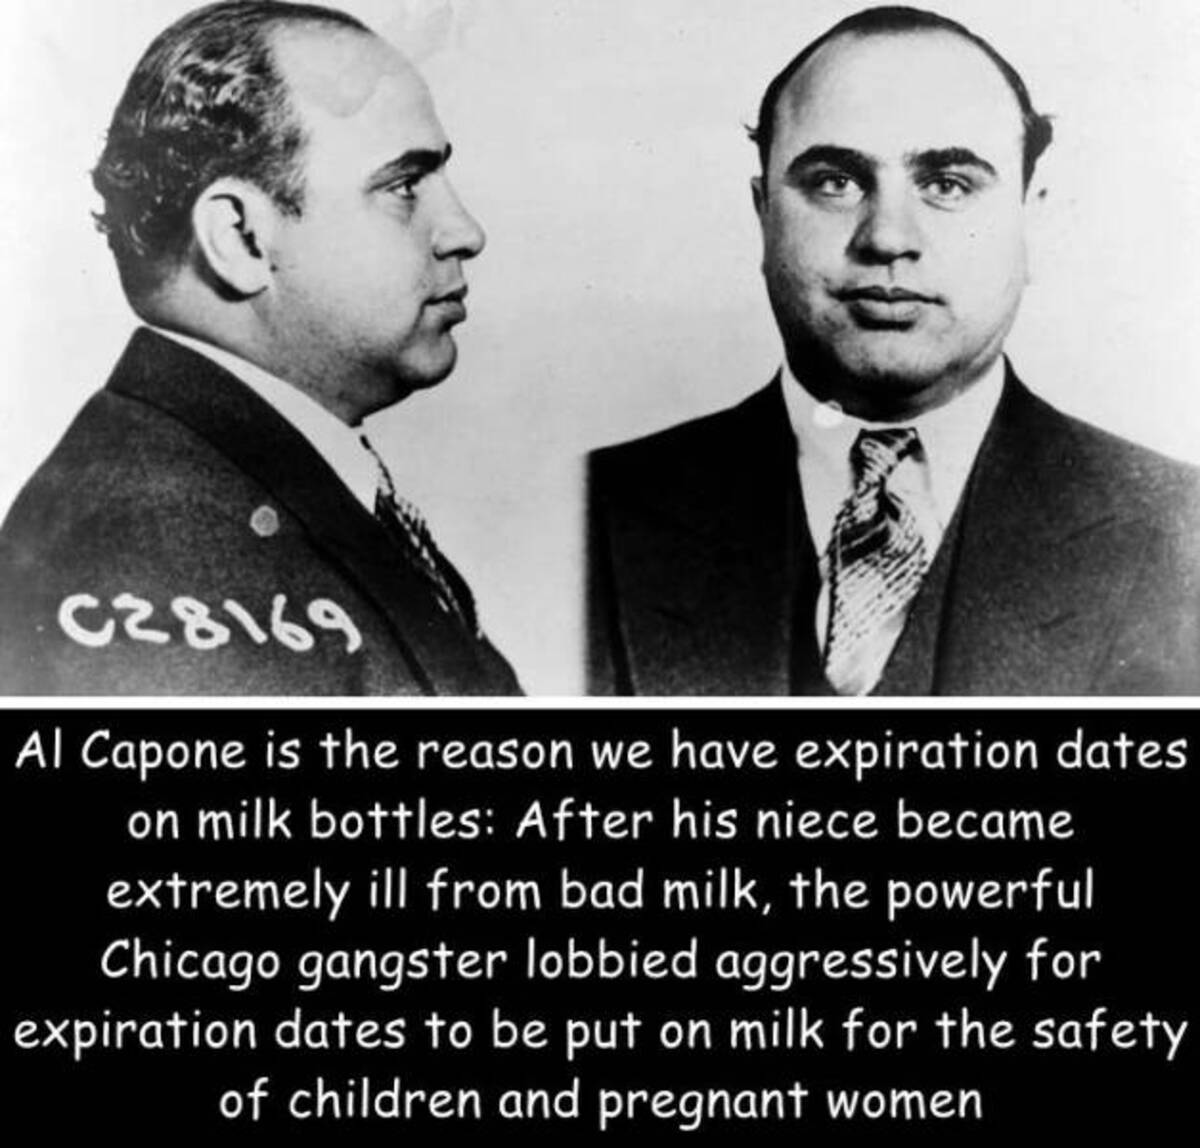 al capone mugshot - 028169 Al Capone is the reason we have expiration dates on milk bottles After his niece became extremely ill from bad milk, the powerful Chicago gangster lobbied aggressively for expiration dates to be put on milk for the safety of chi